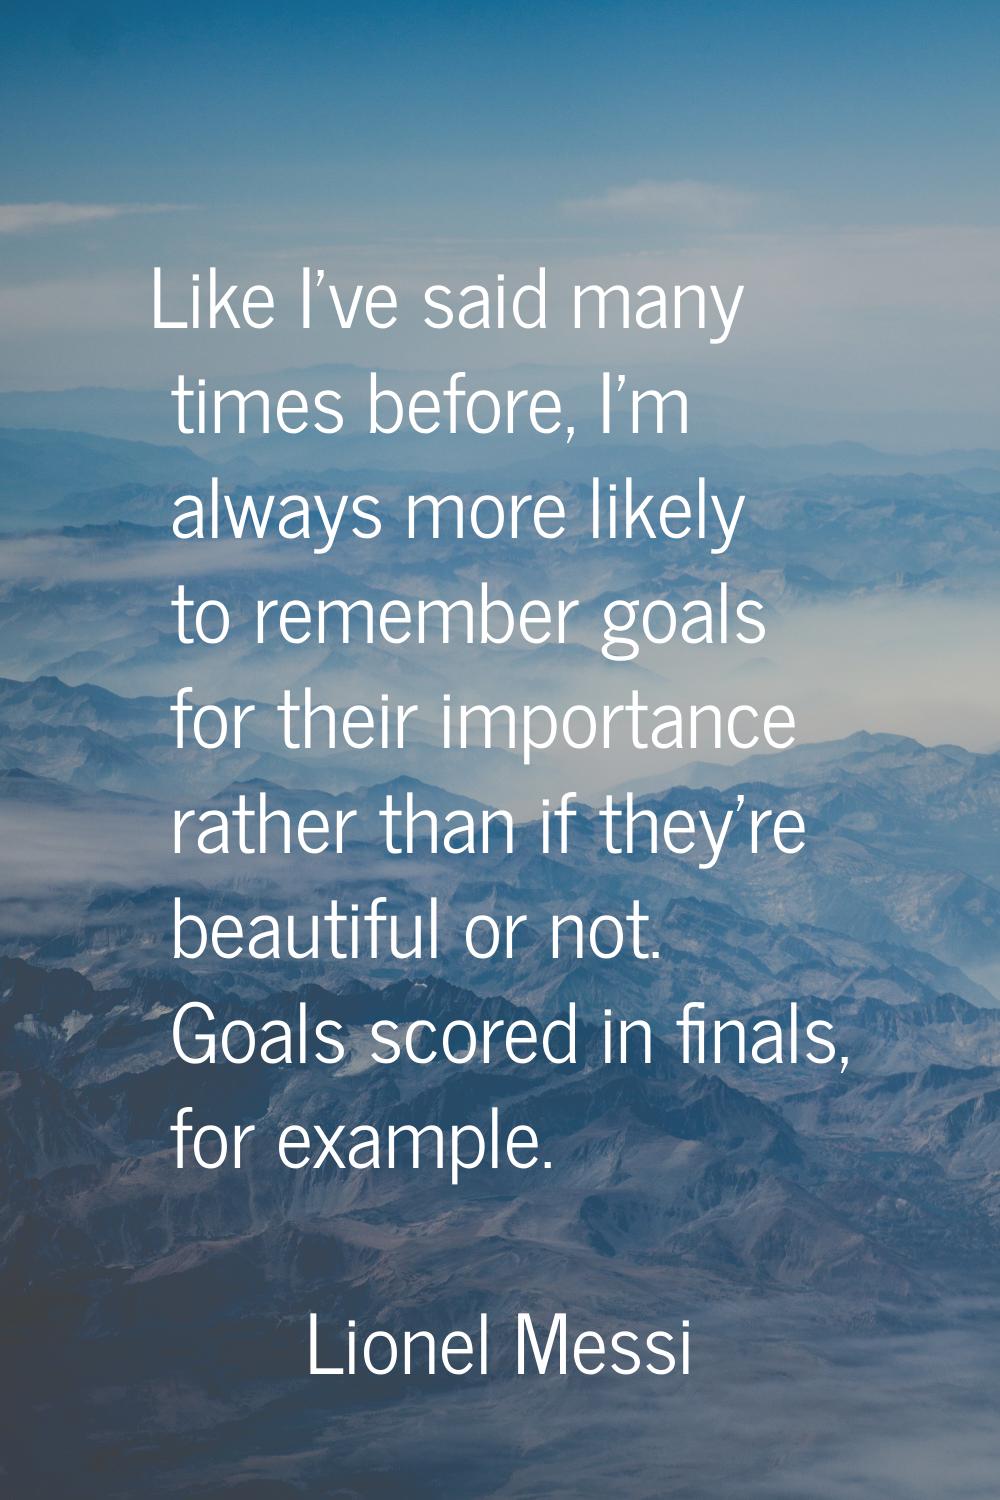 Like I've said many times before, I'm always more likely to remember goals for their importance rat